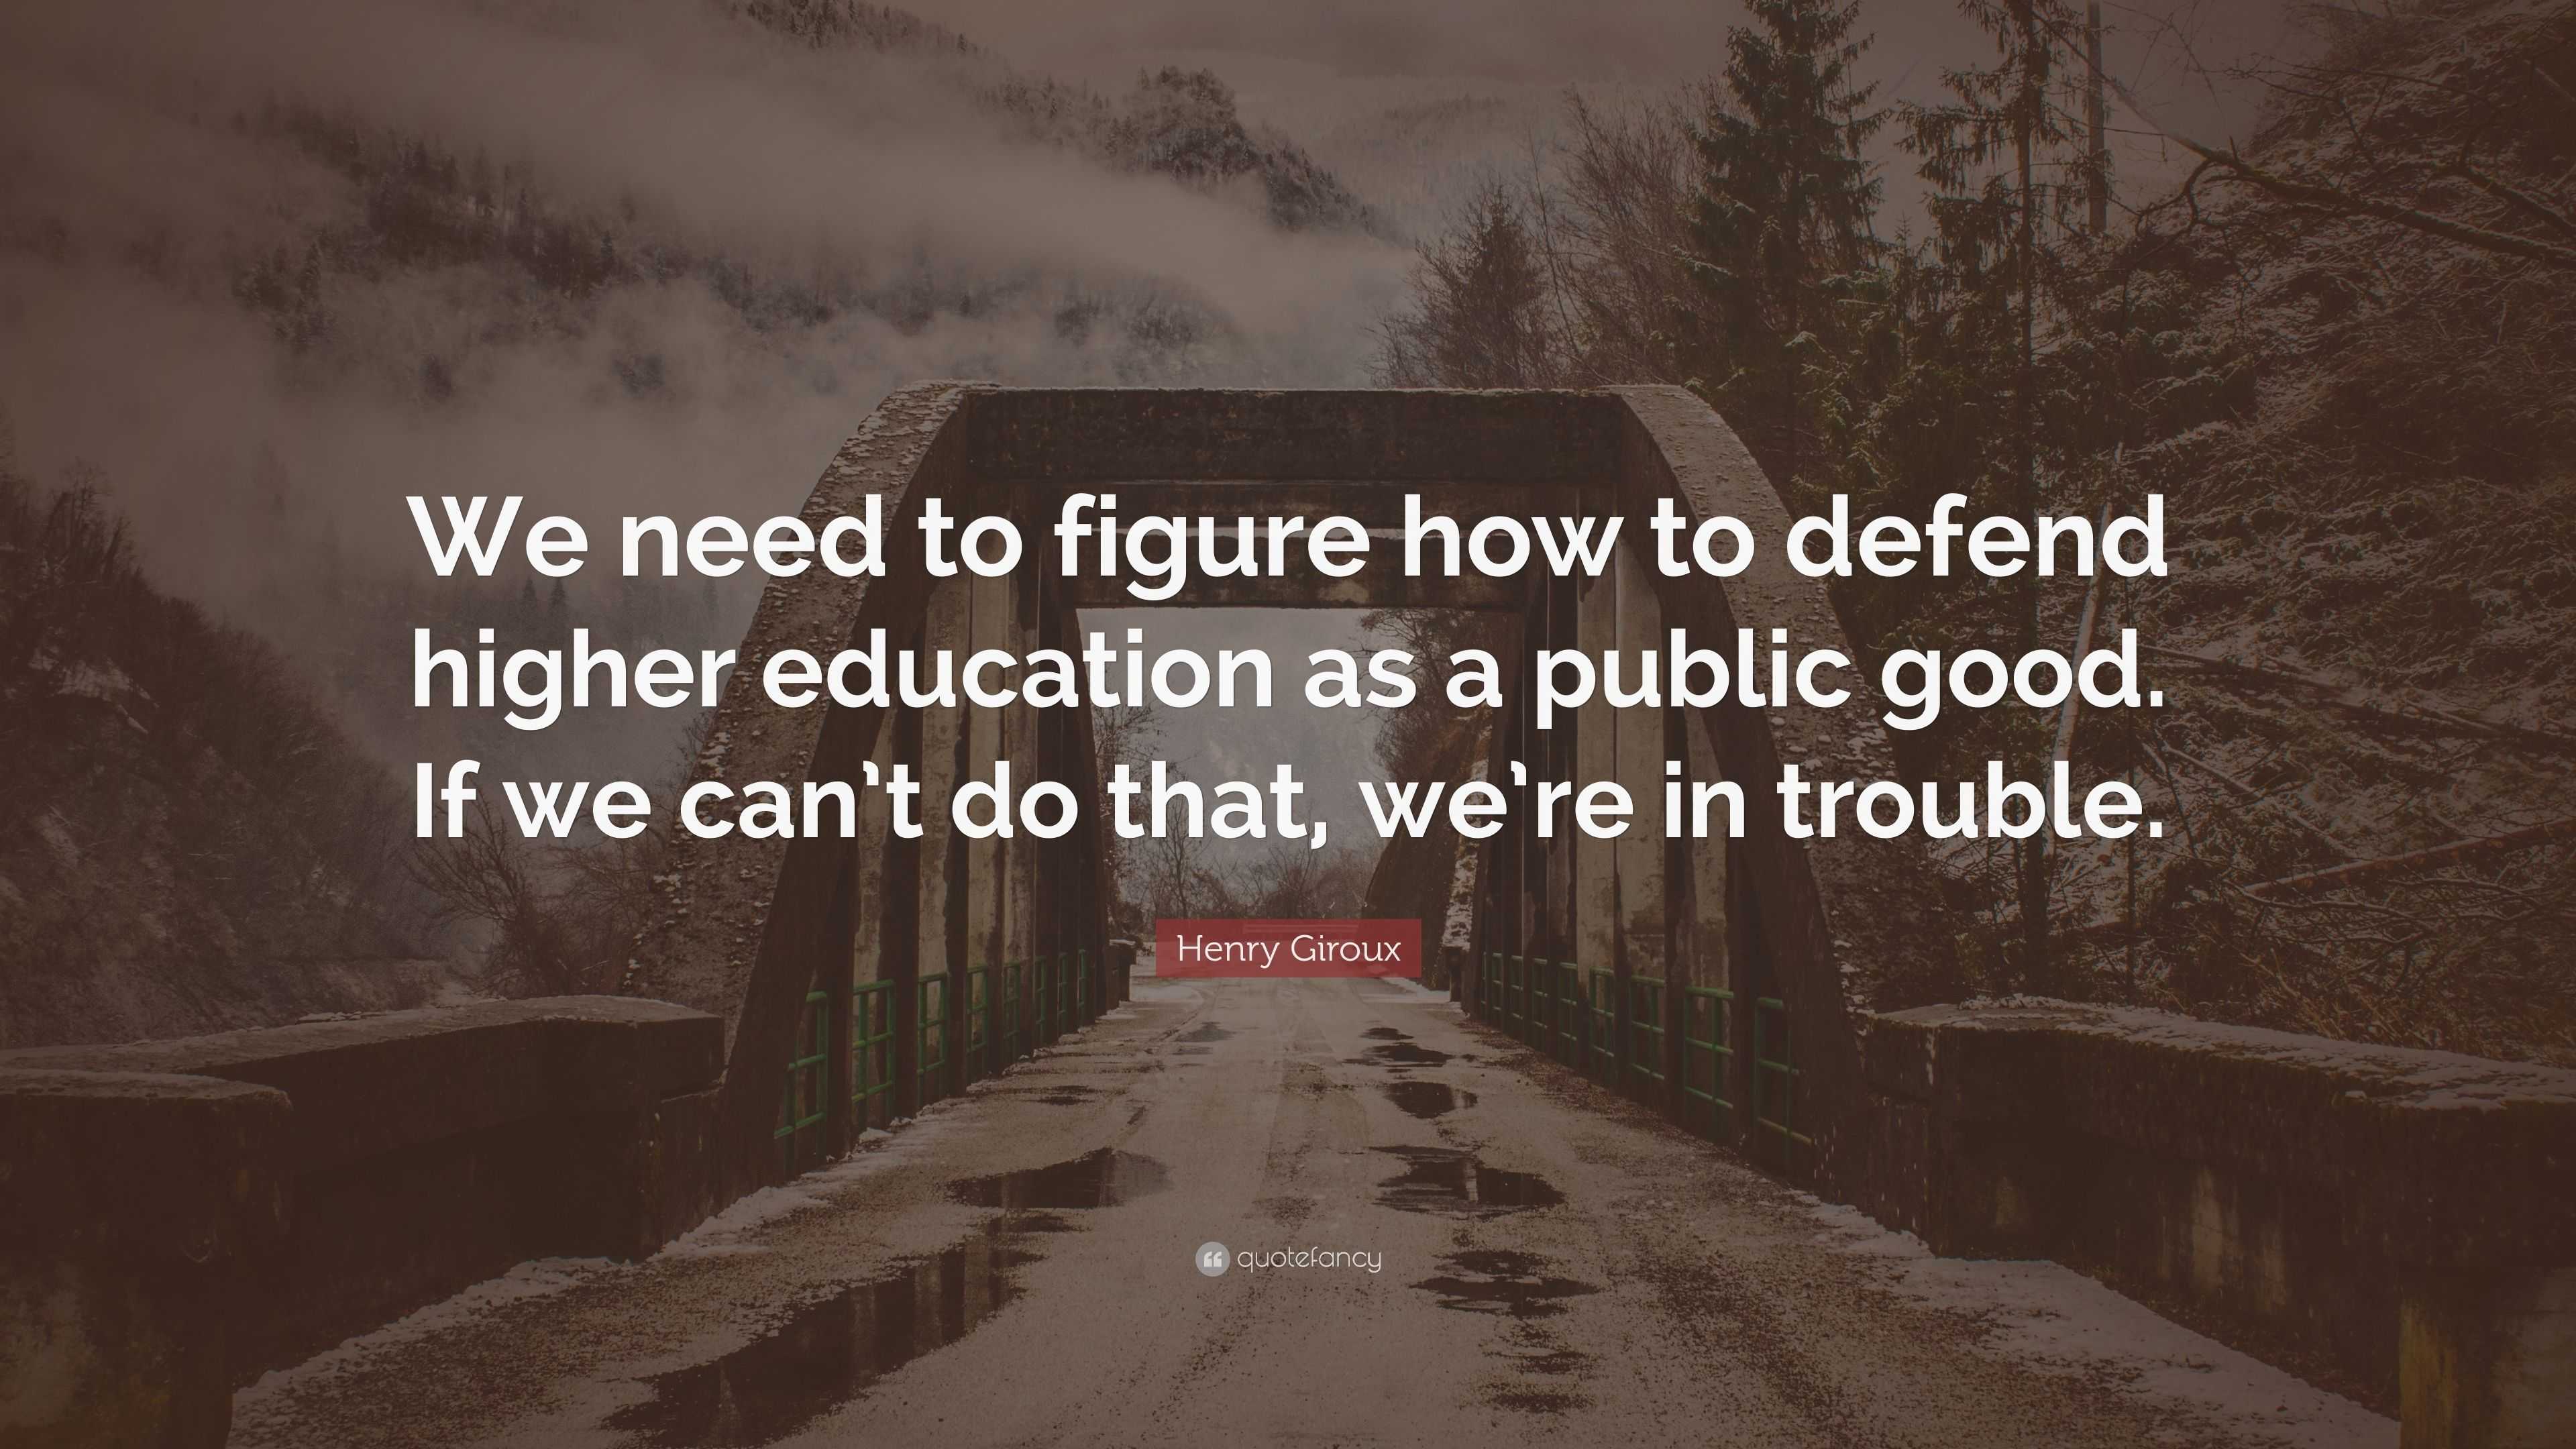 Henry Giroux Quote: “We need to figure how to defend higher education